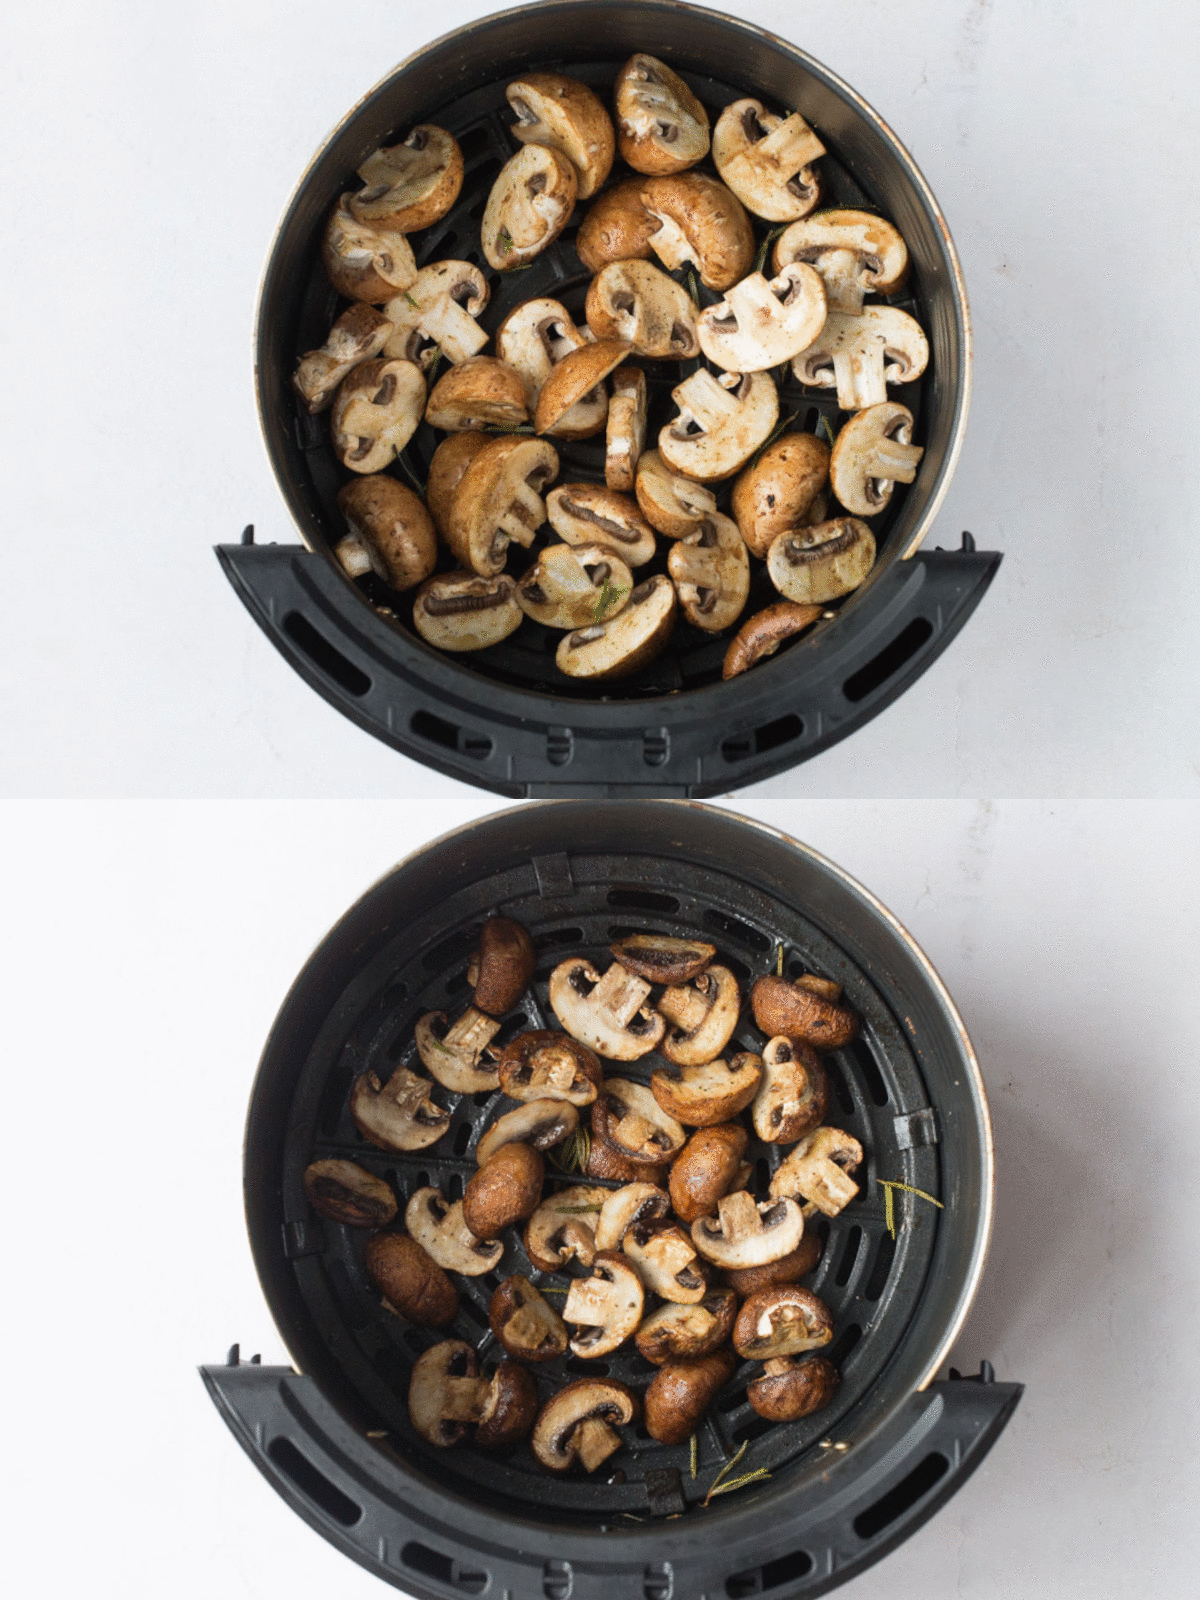 Mushrooms in an air fryer basket, before and after cooking.